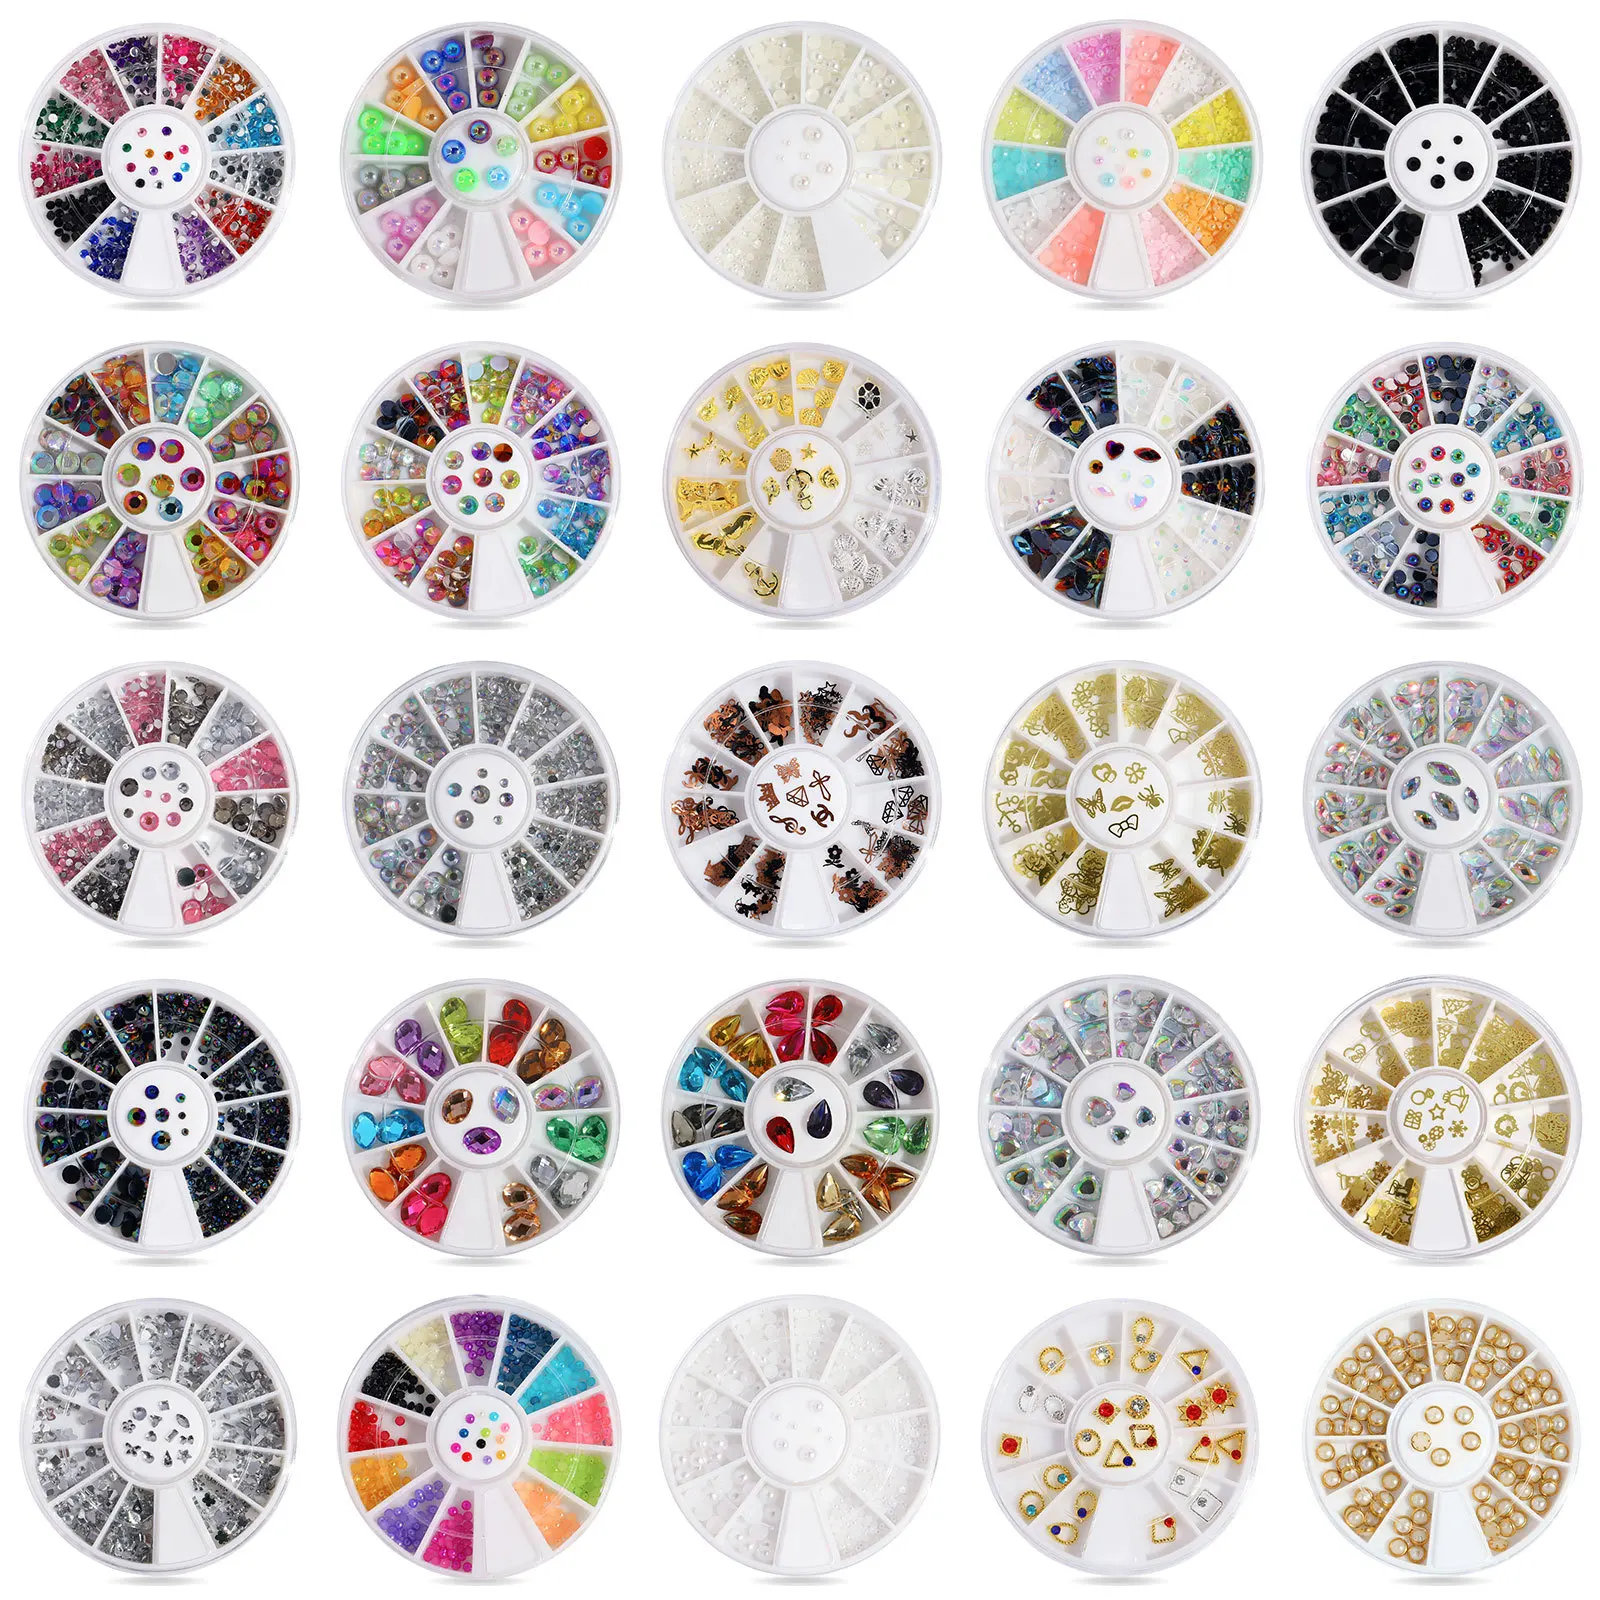 

Multicolor Many Styles Mixed Size Resin Rhinestones Shinning Phone CaseStickers DIY Nail Art Decoration in Wheel Body Crafts